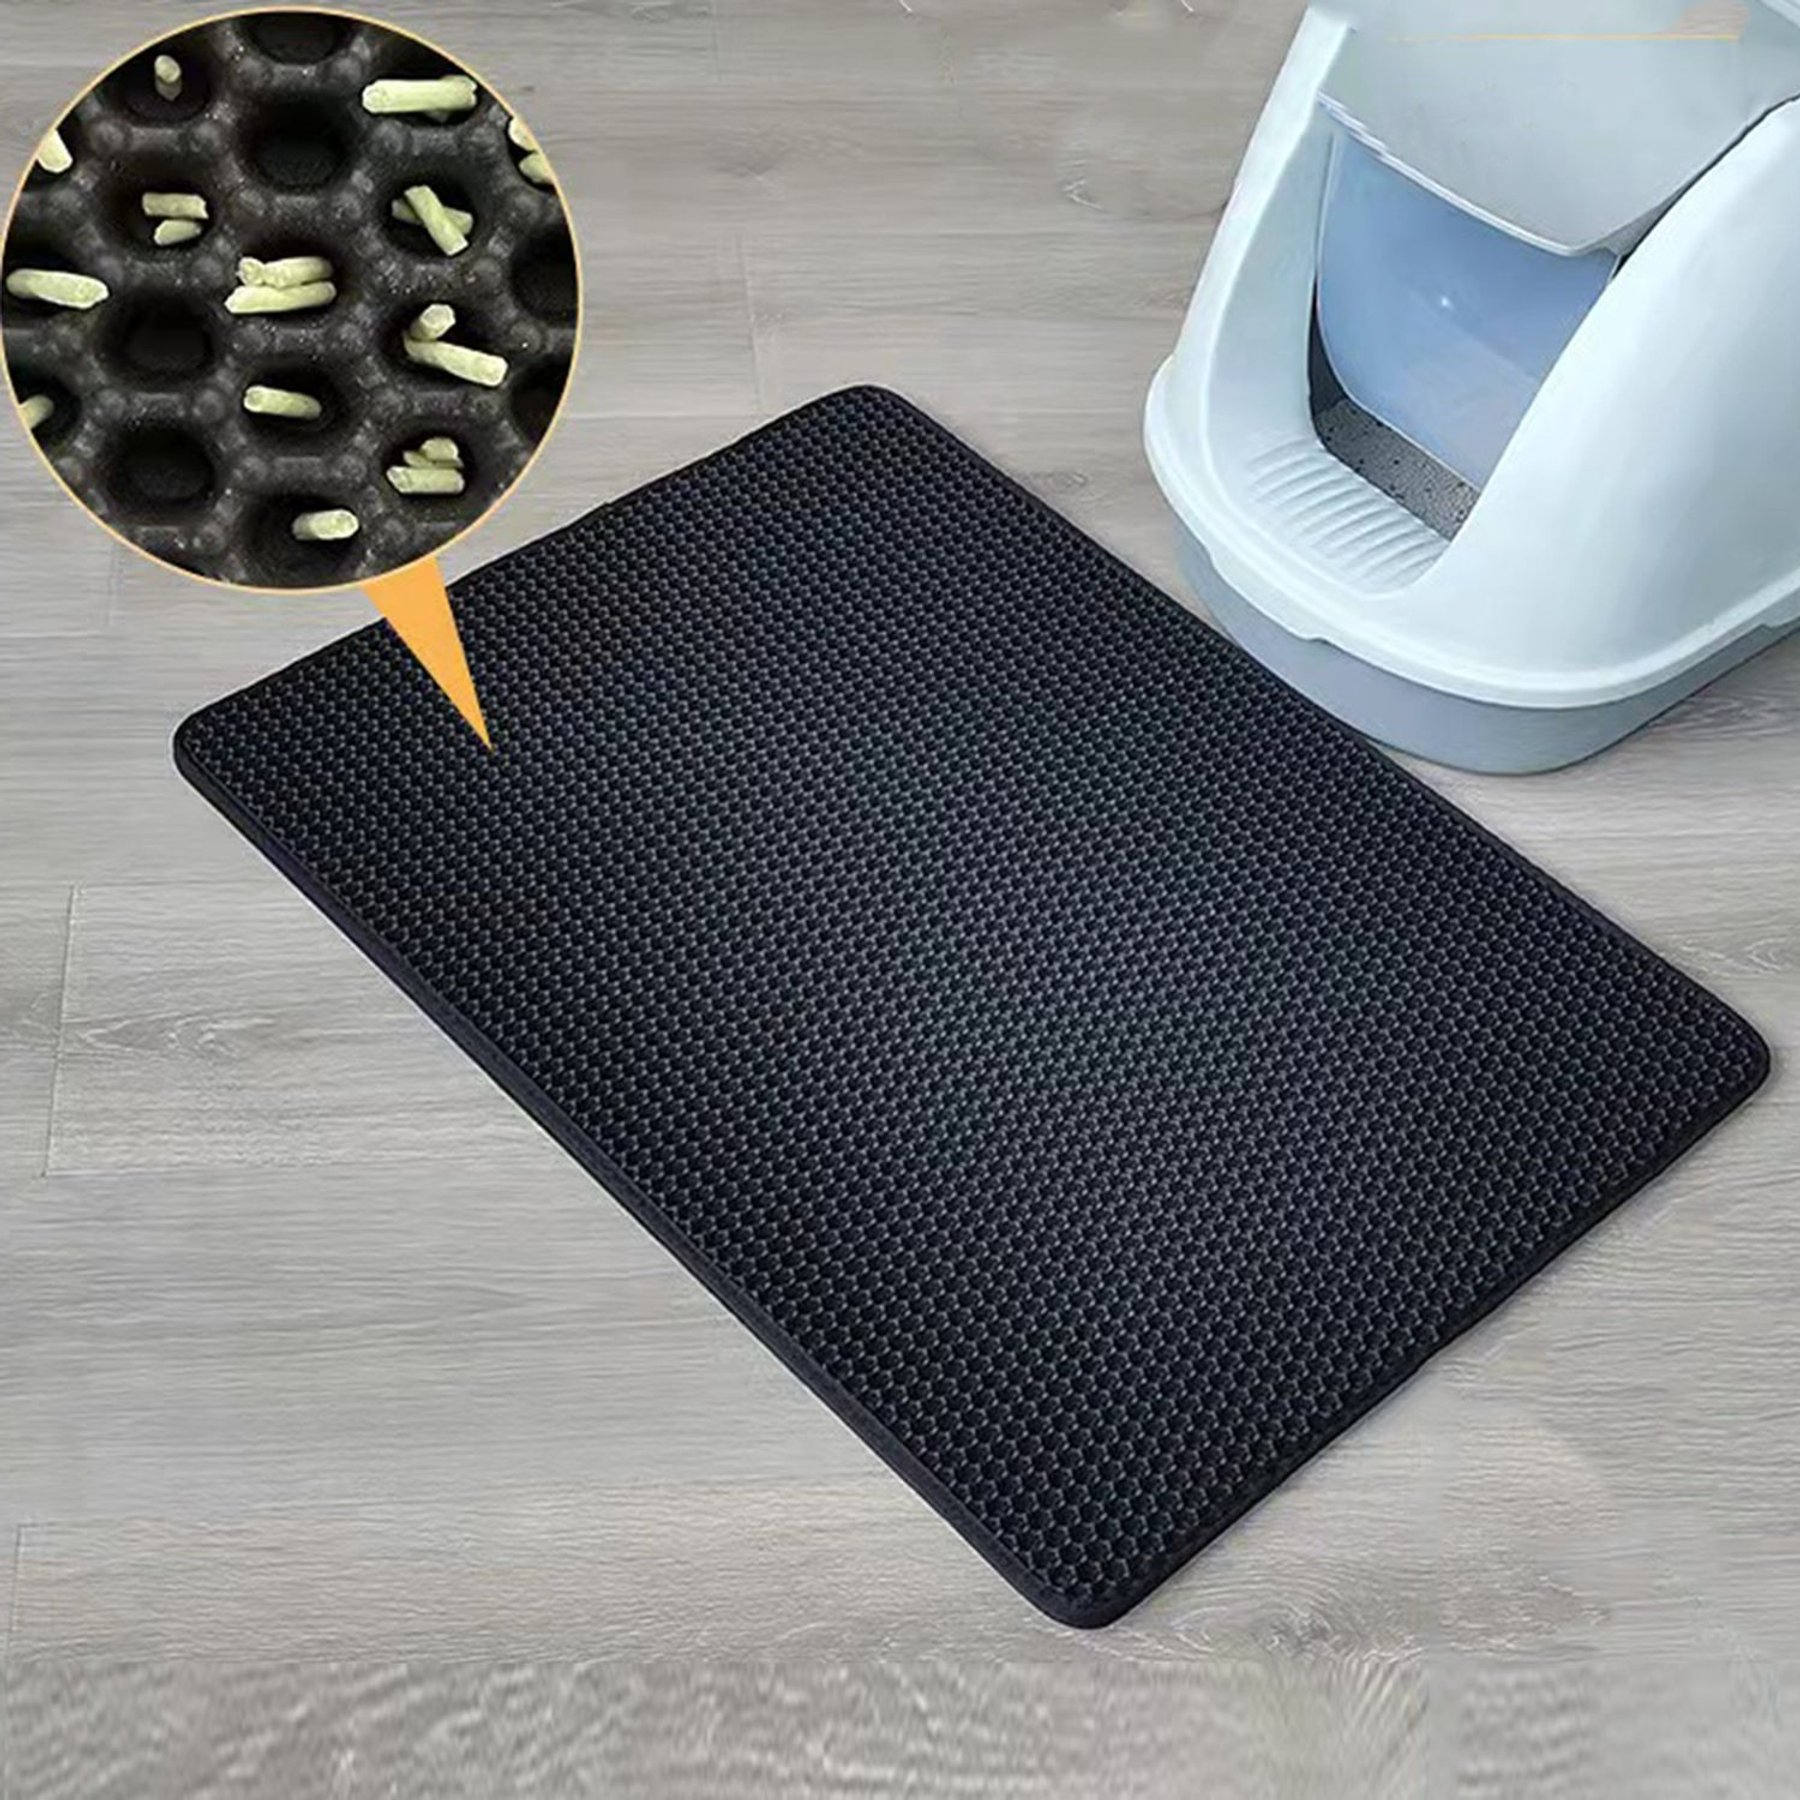 Drymate Litter Trapping 29.5 x 29.5 Corner Mat in Charcoal Grey